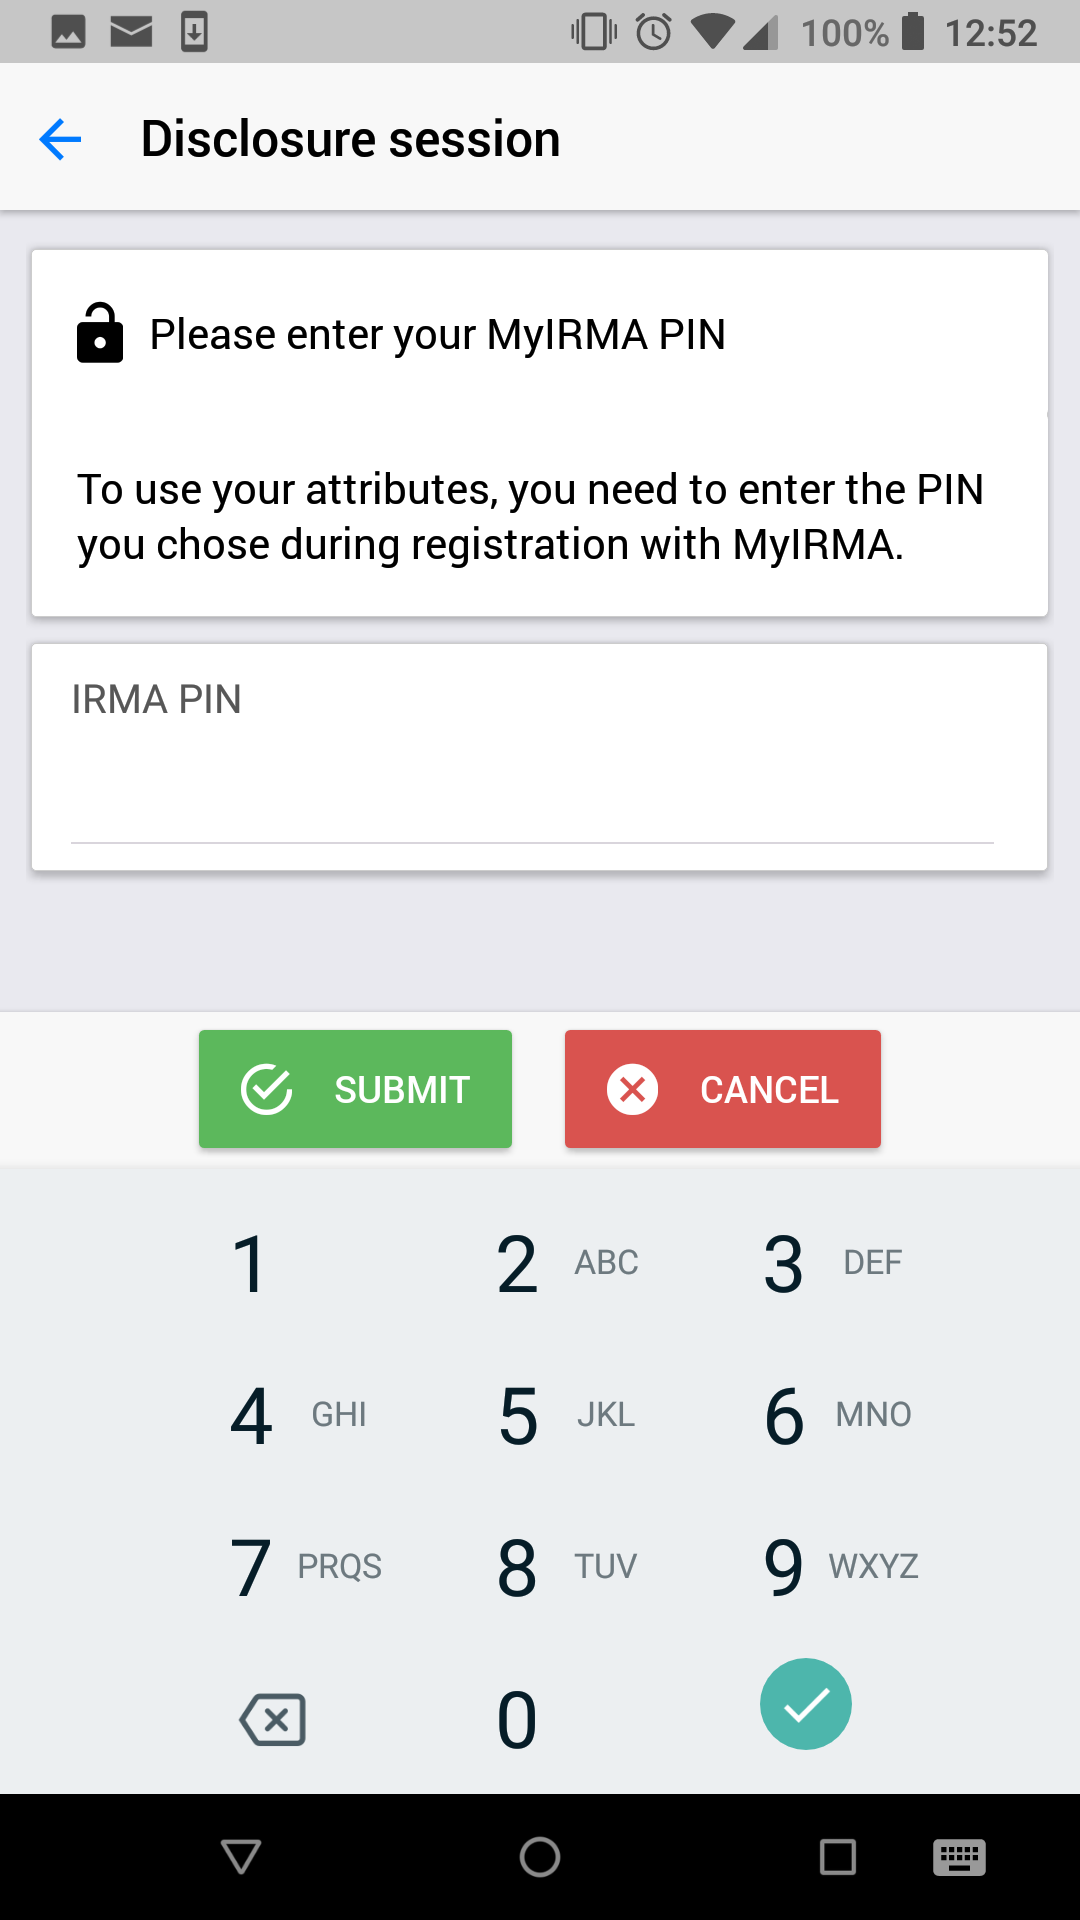 Screenshot of the IRMA app on iOS, showing the PIN entry screen during a disclosure session.